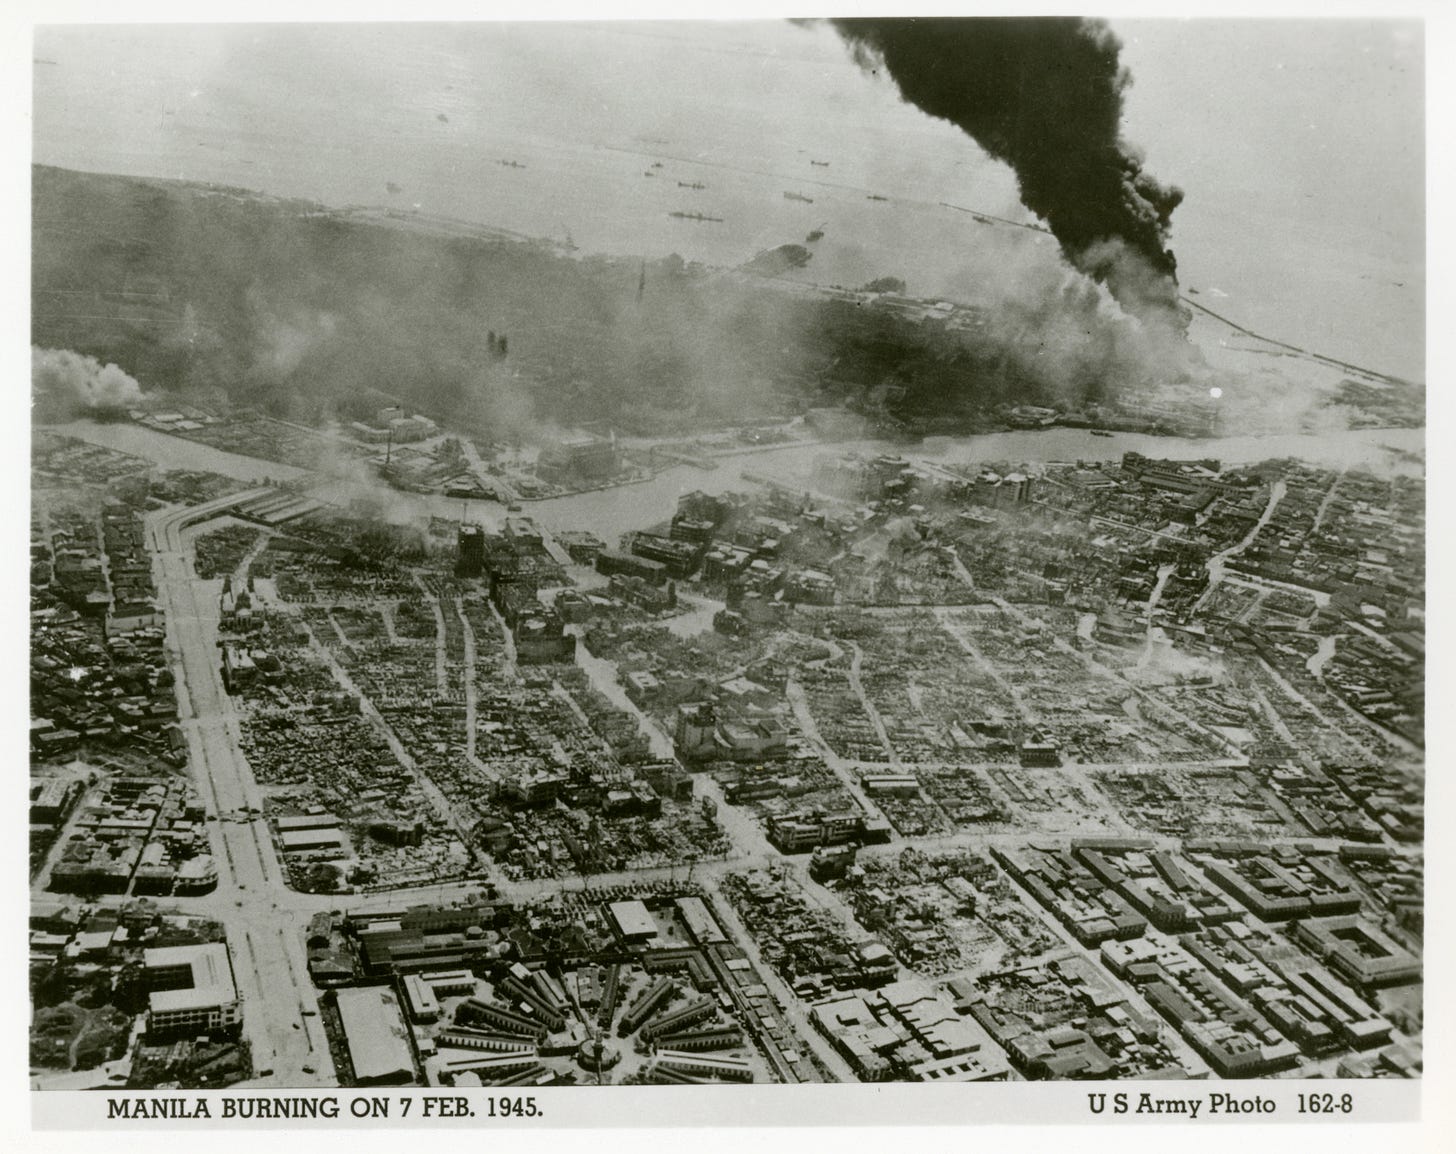 Bombed out Manila on fire, Philippines, 1945 | The Digital Collections of  the National WWII Museum : Oral Histories